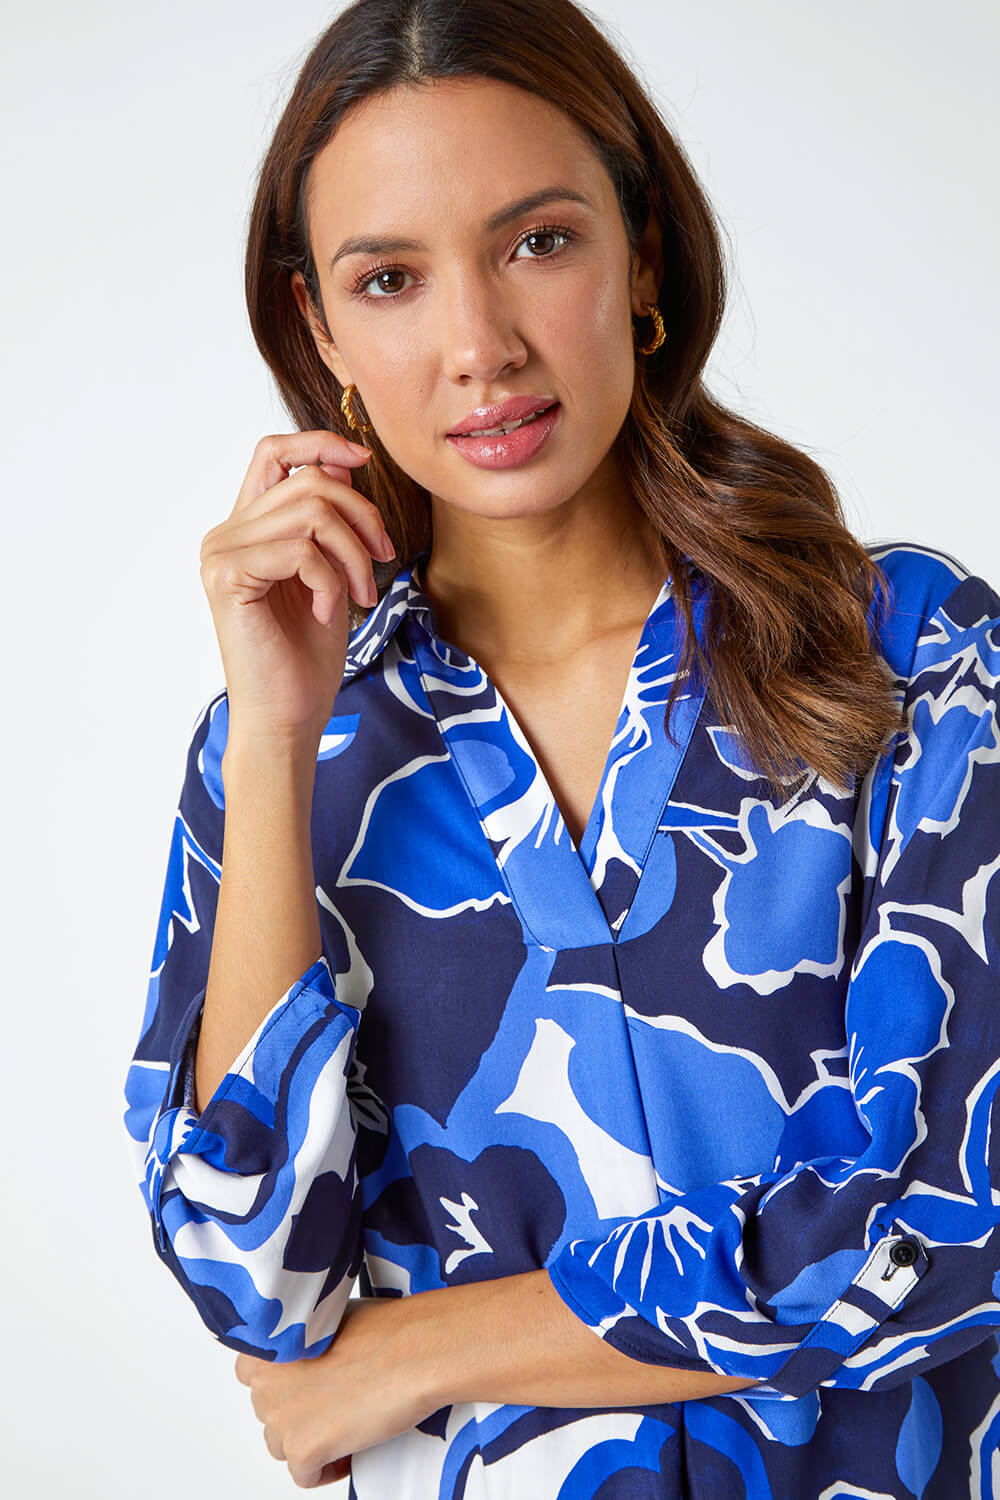 Royal Blue Floral Print Pleat Front Top, Image 5 of 6